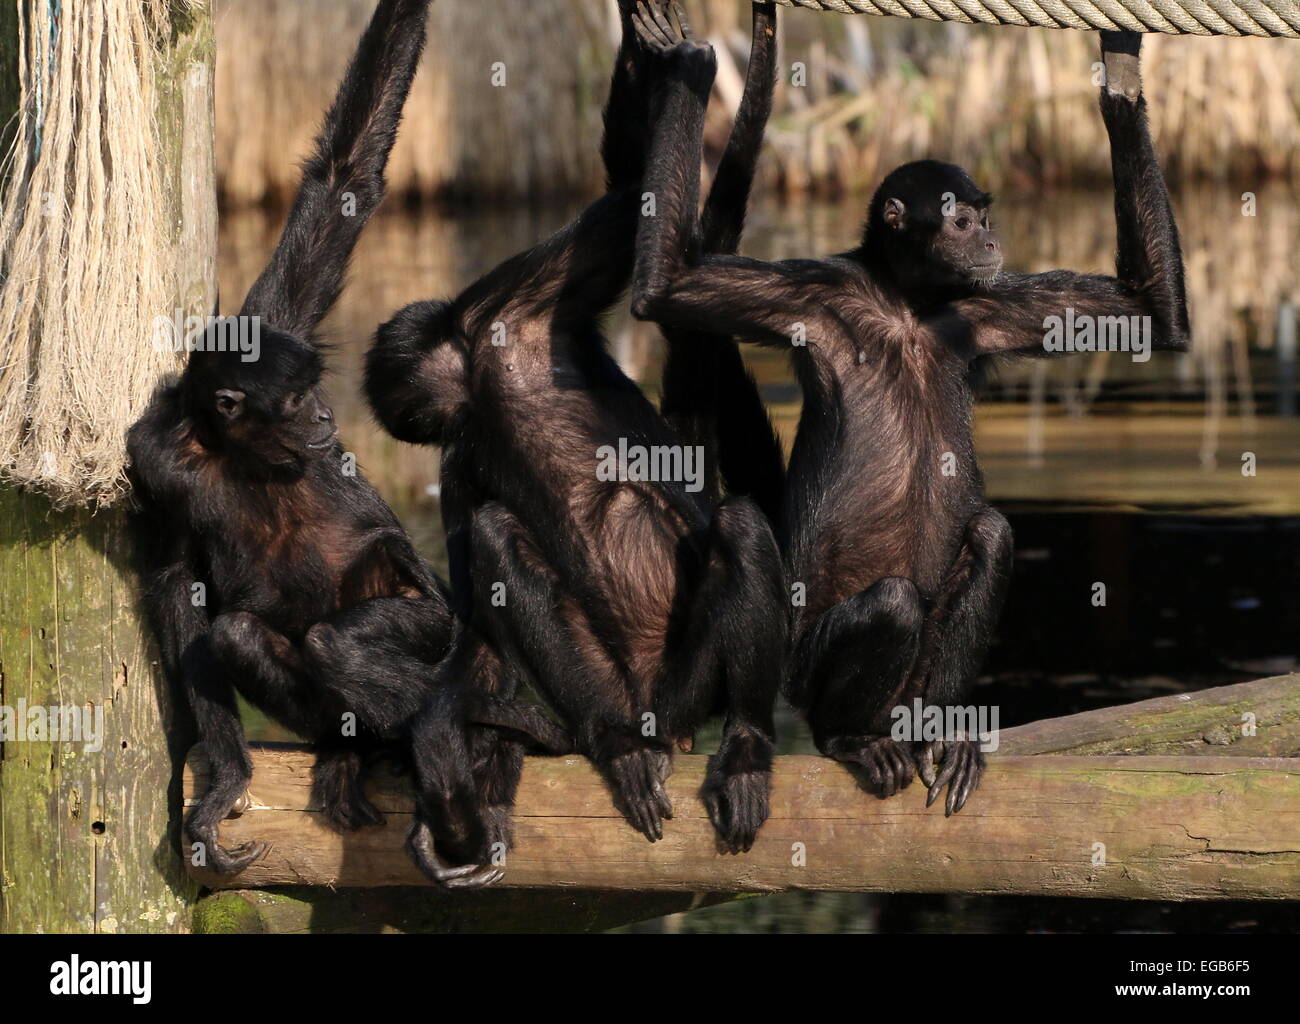 Three Colombian Black-headed spider monkeys (Ateles fusciceps Robustus) at Emmen Zoo, The Netherlands Stock Photo